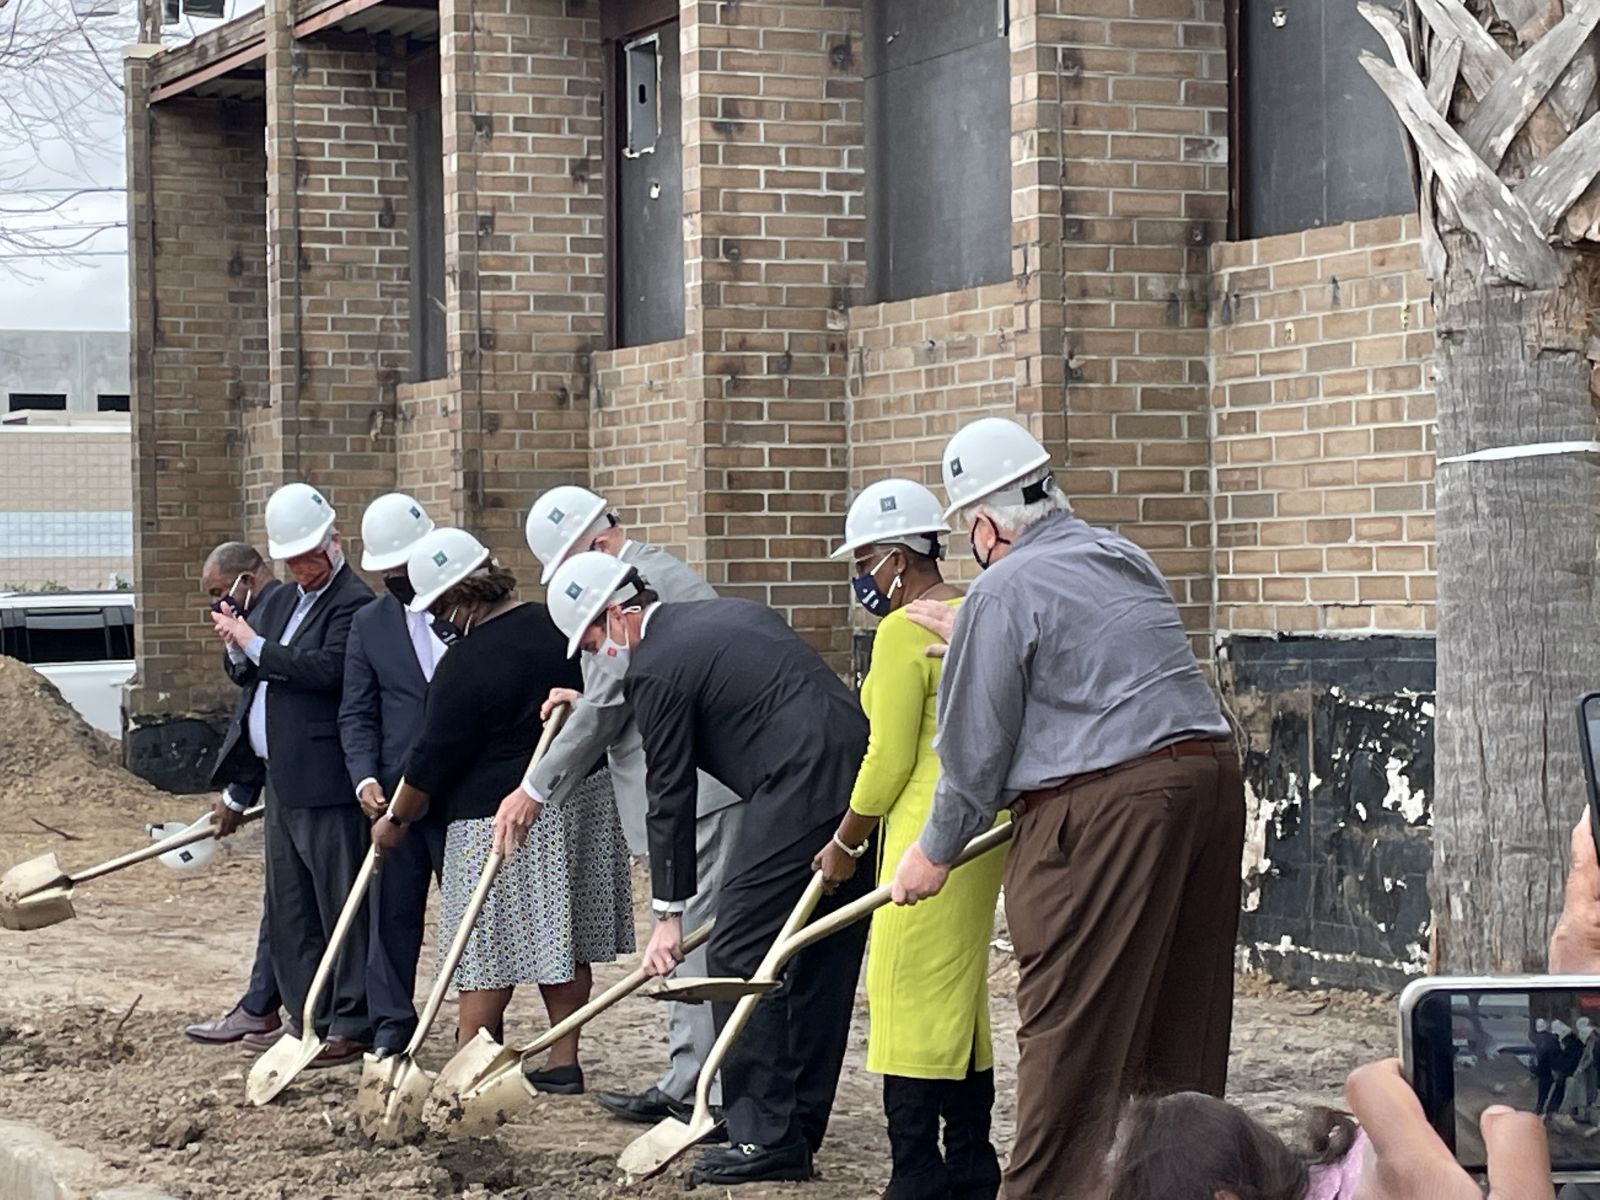 Increasing H.O.P.E. Executive Director Dorothea Bernique picked up a shovel and joins other officials at the groundbreaking for The Opportunity Center last month. (Photo/Kim Miller)